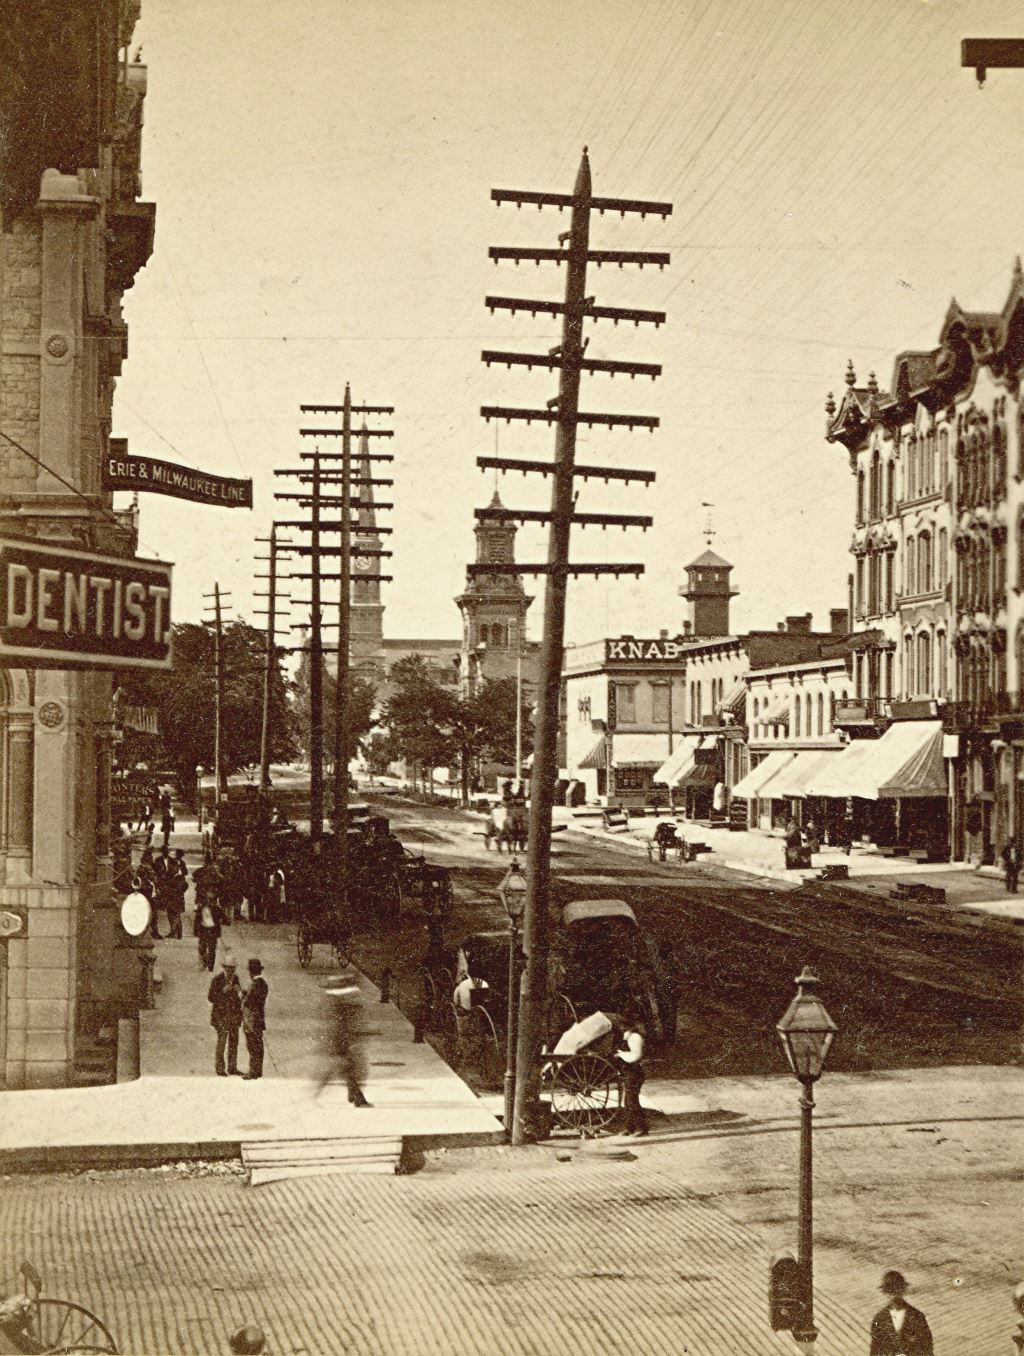 Broadway North of Wisconsin, 1879. Image courtesy of Jeff Beutner.